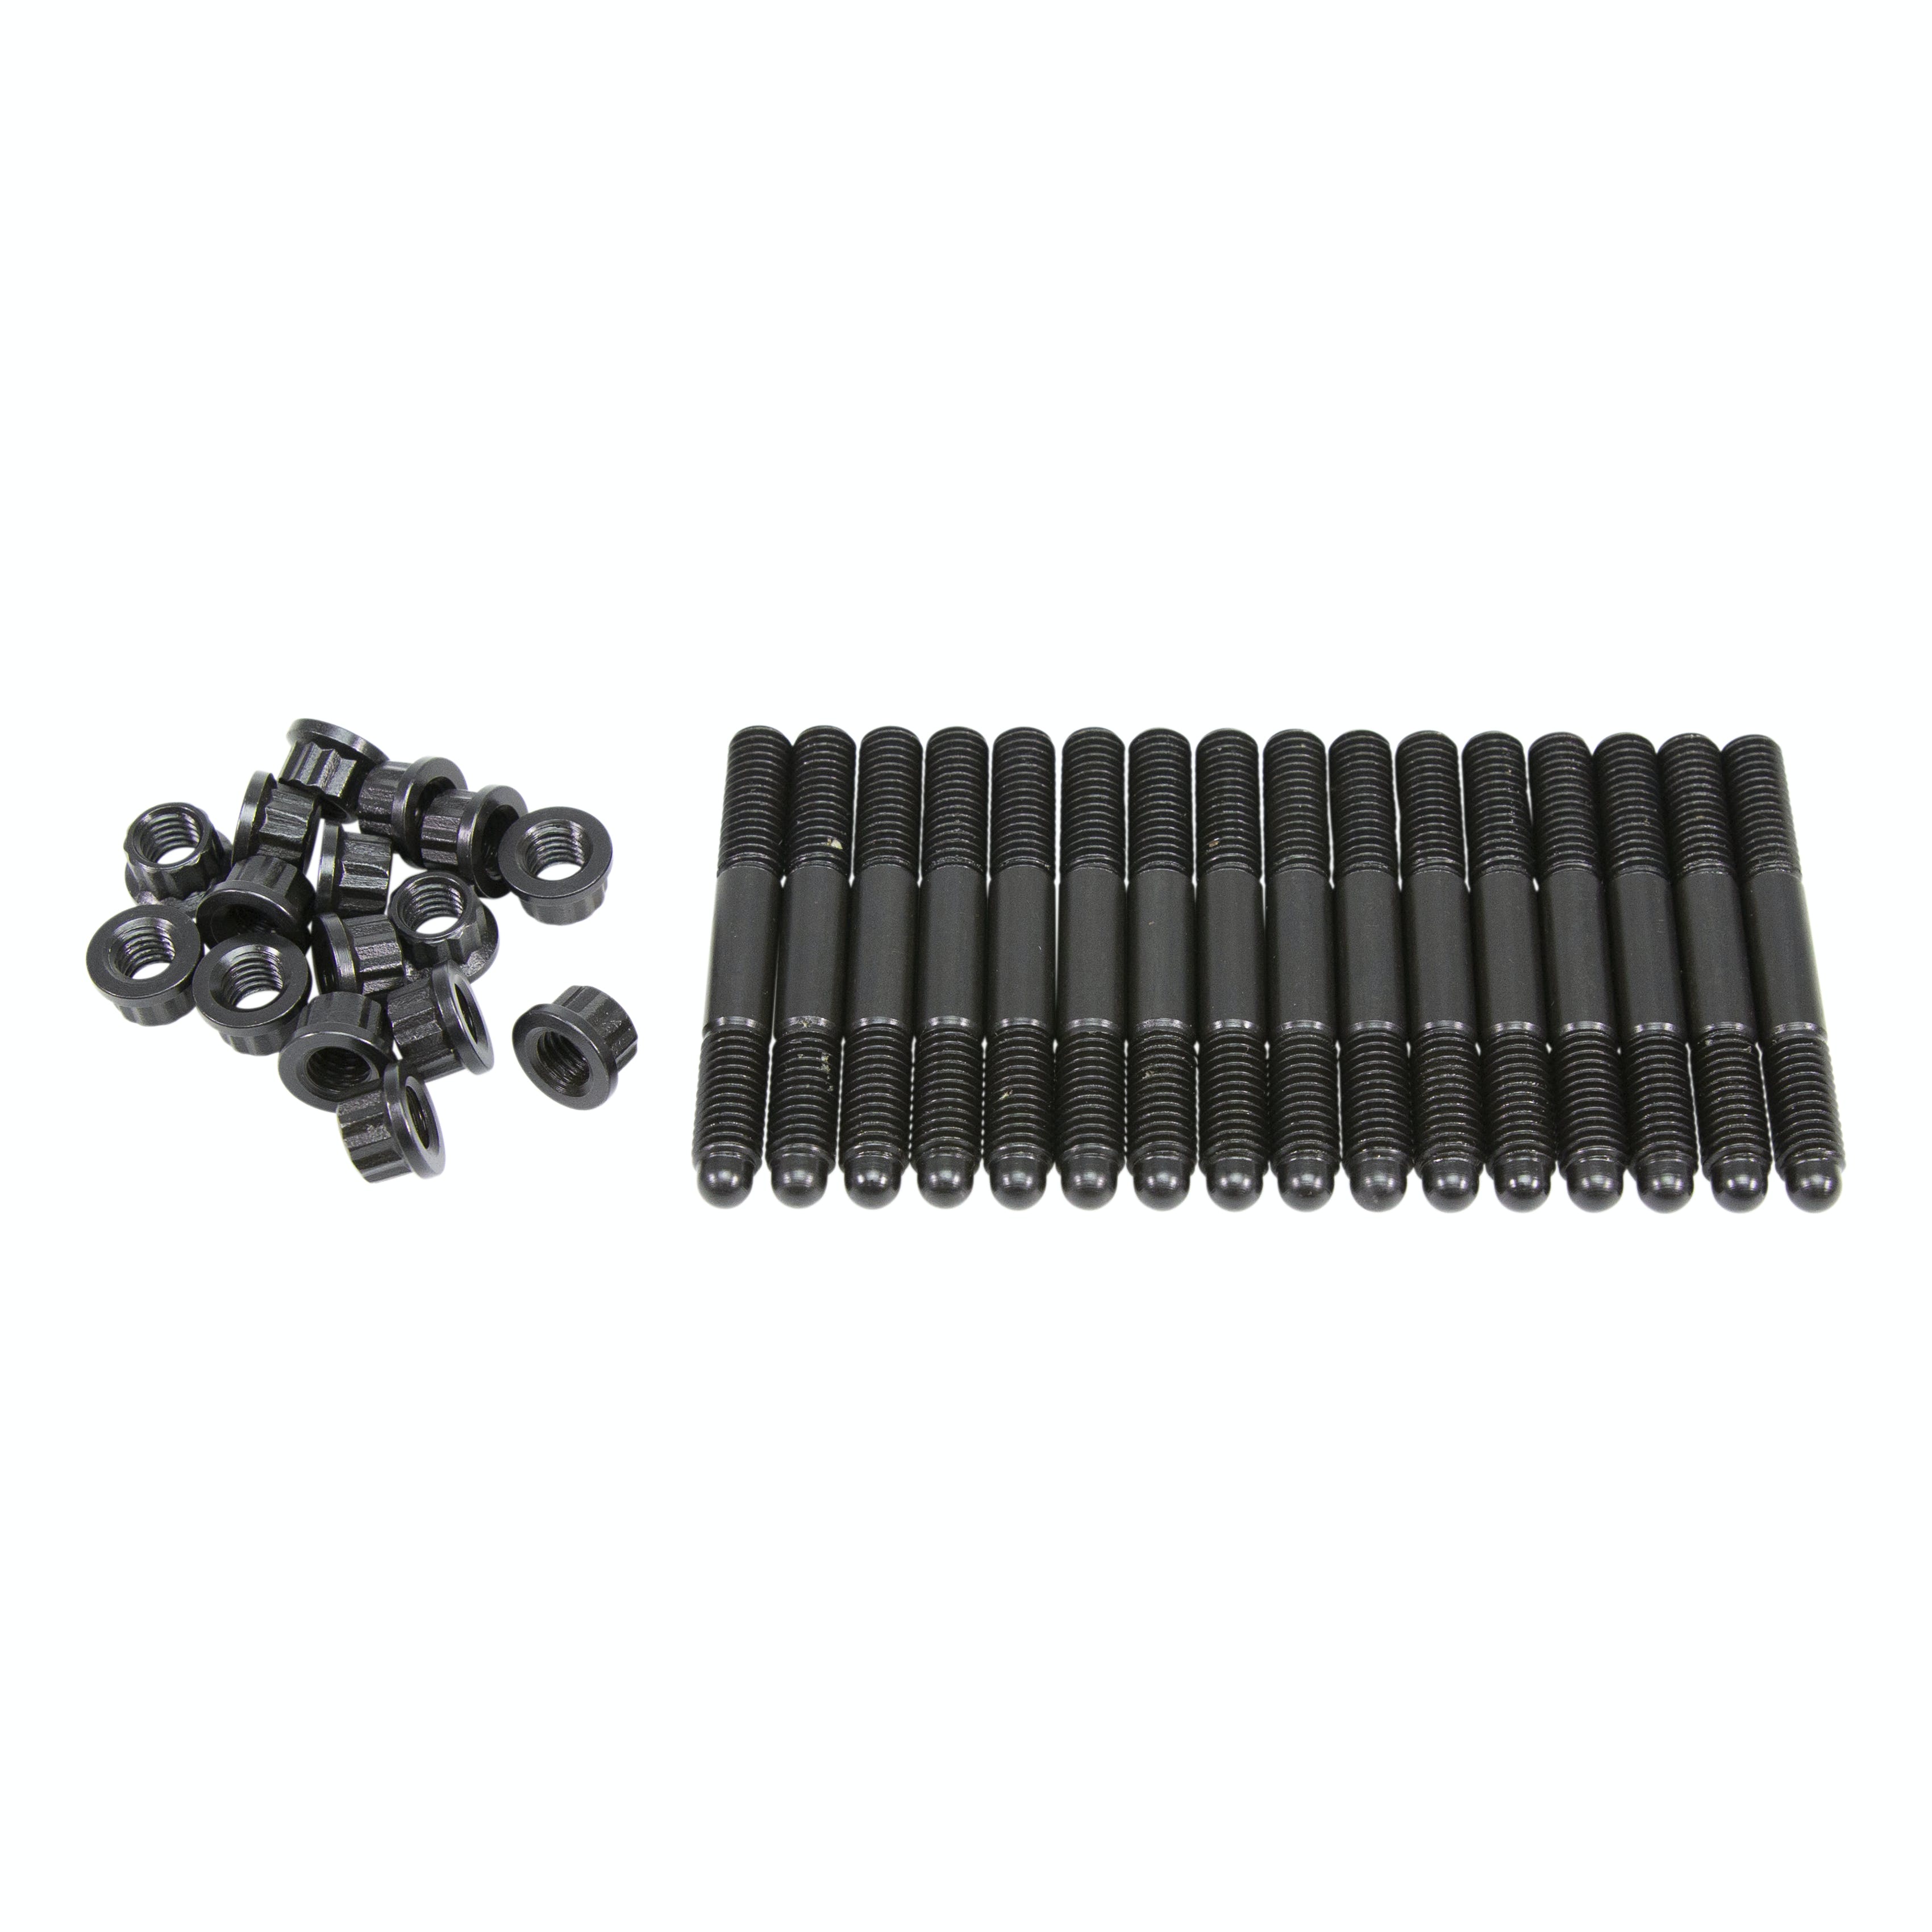 Competition Cams 4582-KIT M8x1.25 threads on both sides. 65mm Overall Stud Length. 12 Point flange nuts